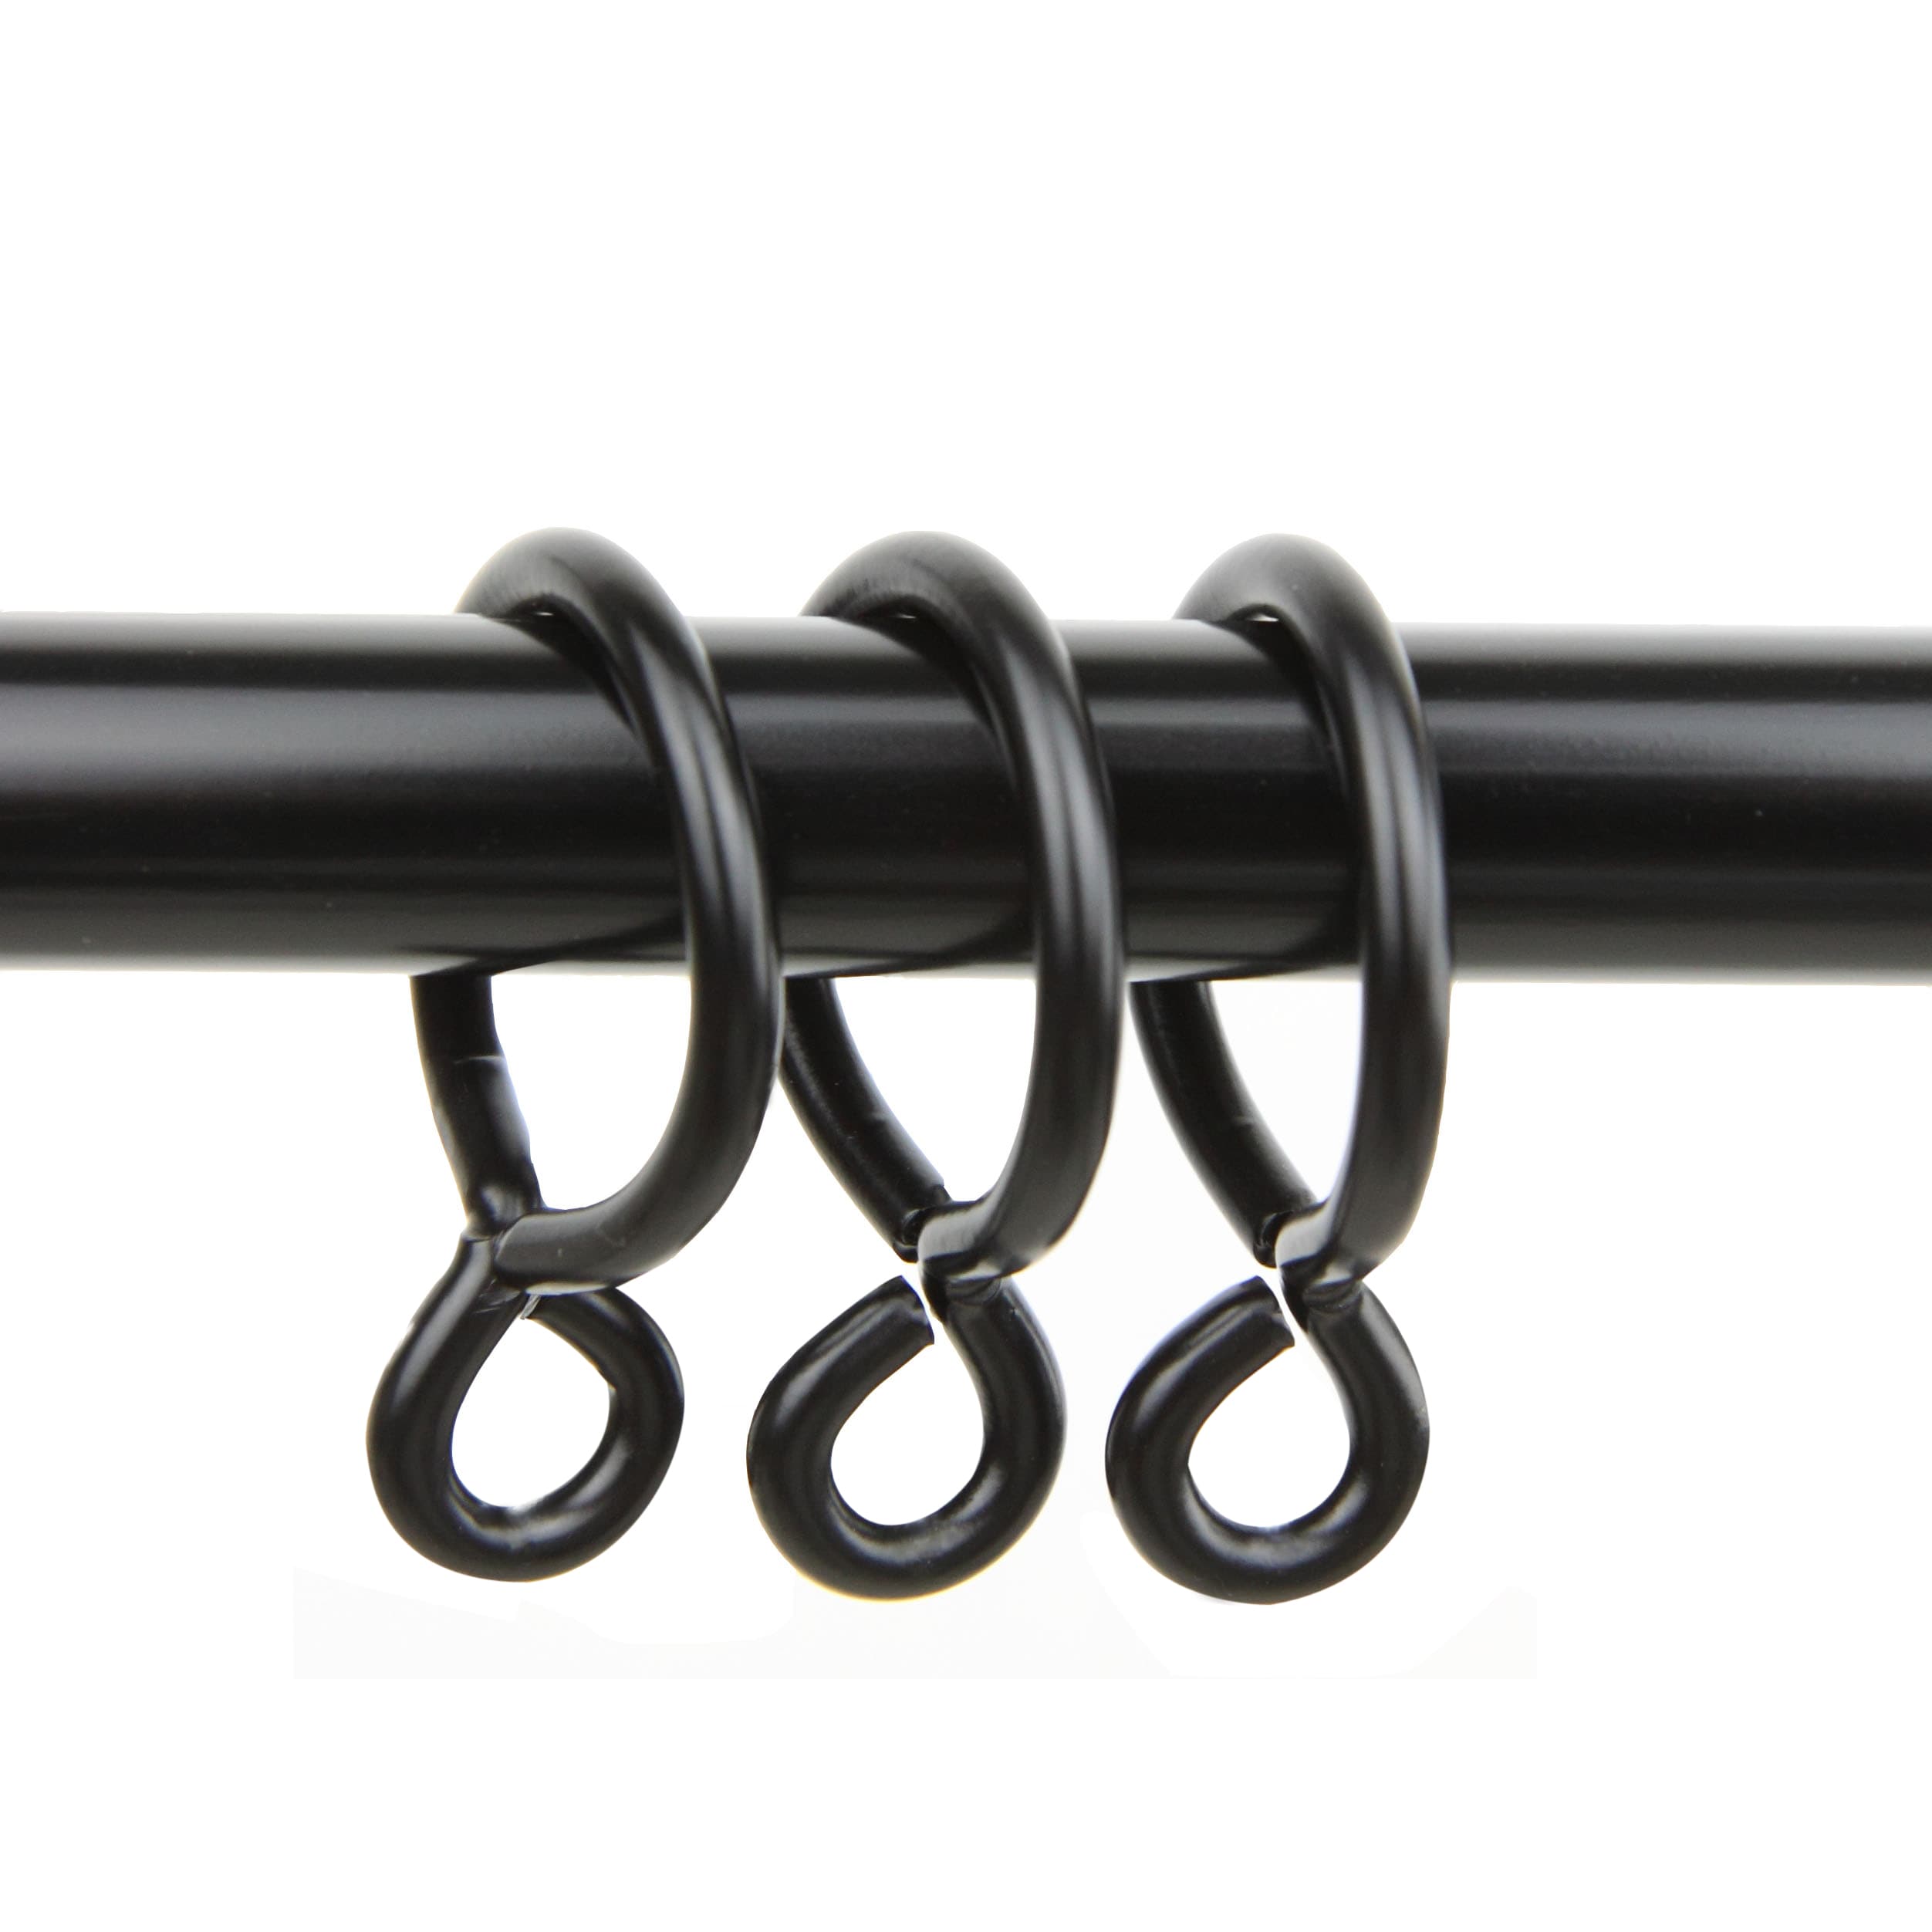 Home Decorators Collection Oil-Rubbed Bronze Steel Curtain Rings